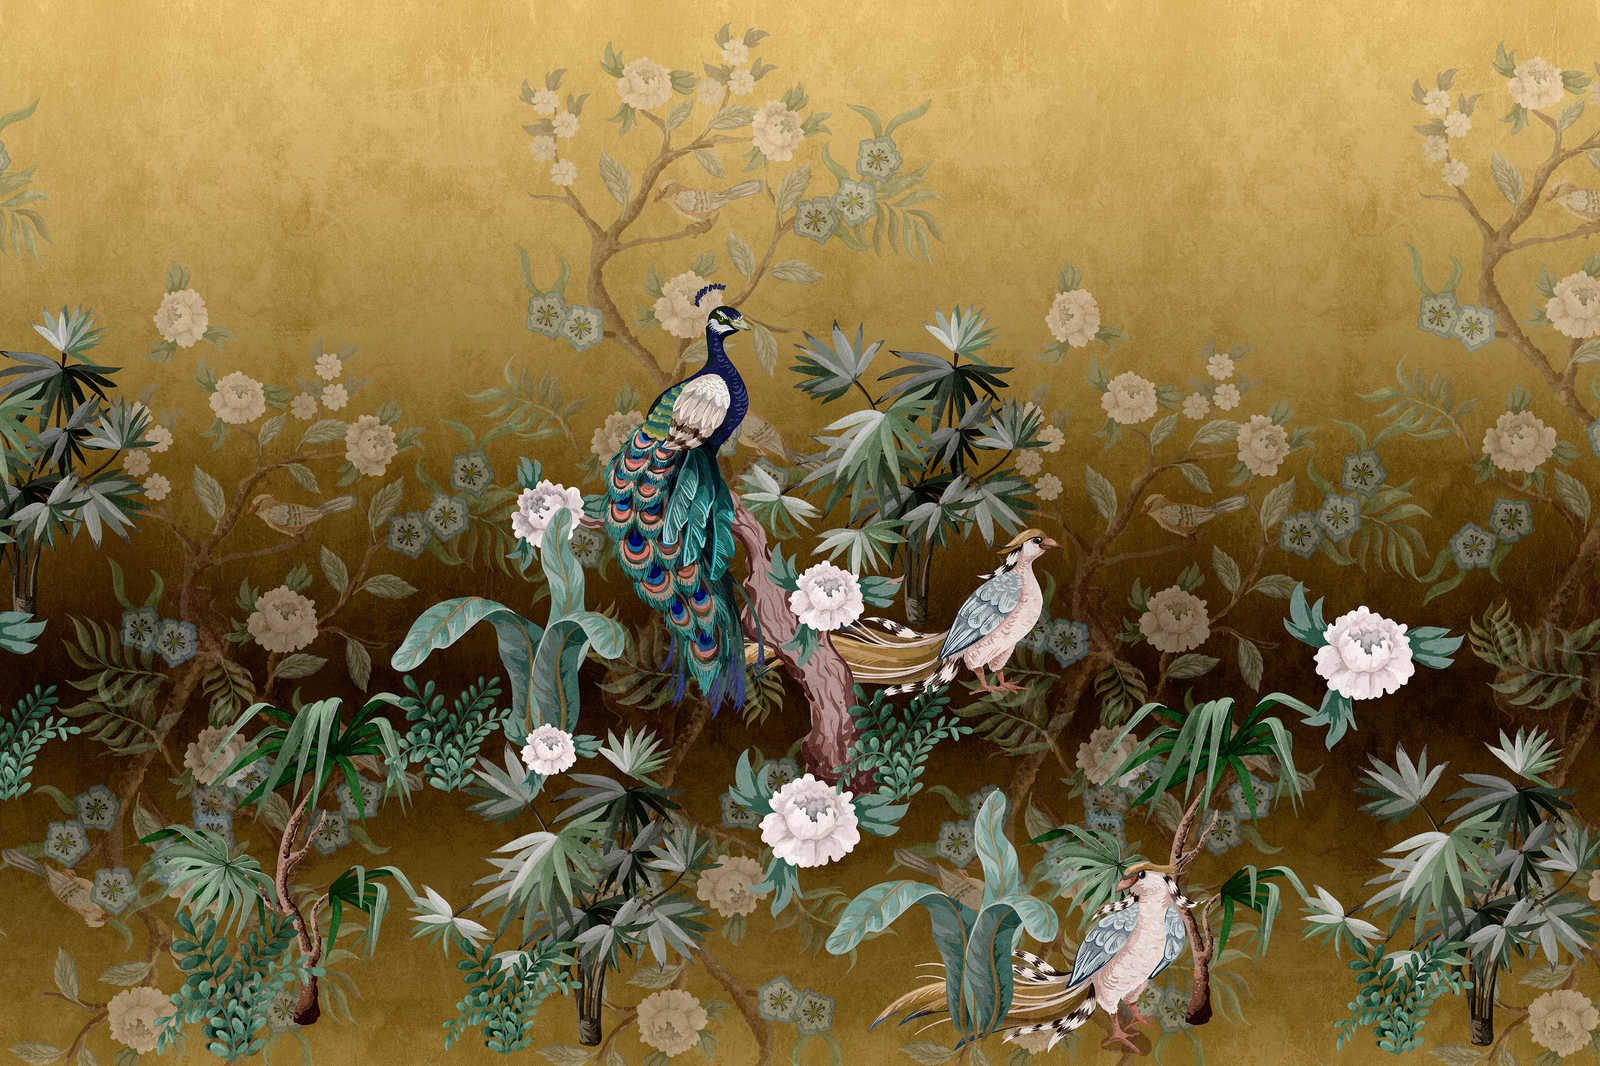             Peacock Island 3 - Canvas painting Peacocks Garden Gold with Plants & Blossoms - 1.20 m x 0.80 m
        